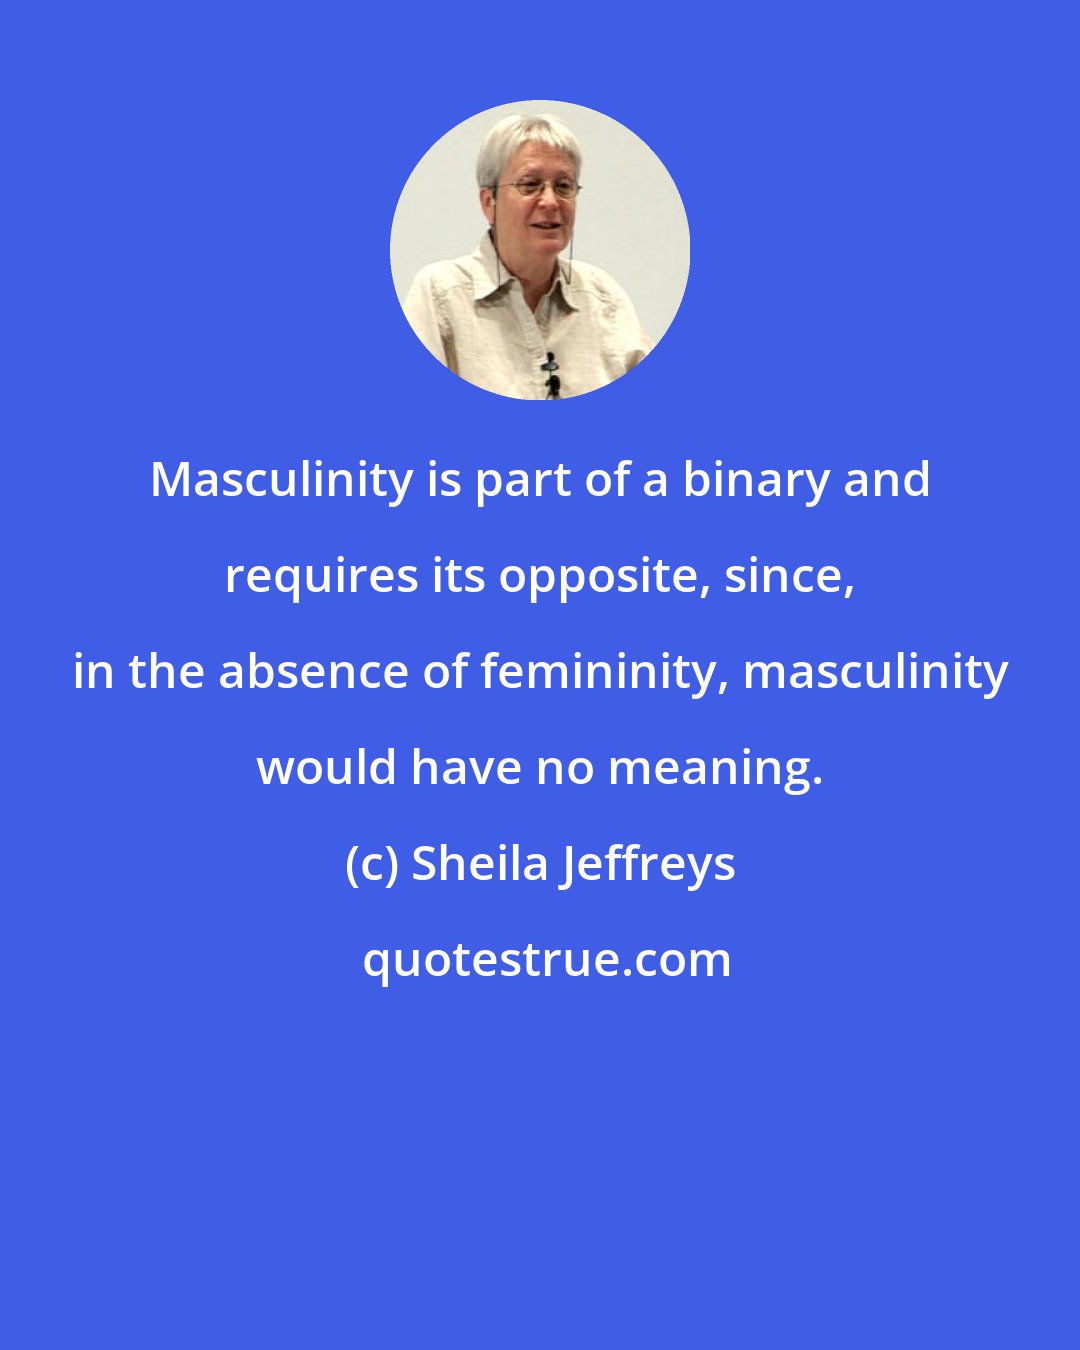 Sheila Jeffreys: Masculinity is part of a binary and requires its opposite, since, in the absence of femininity, masculinity would have no meaning.